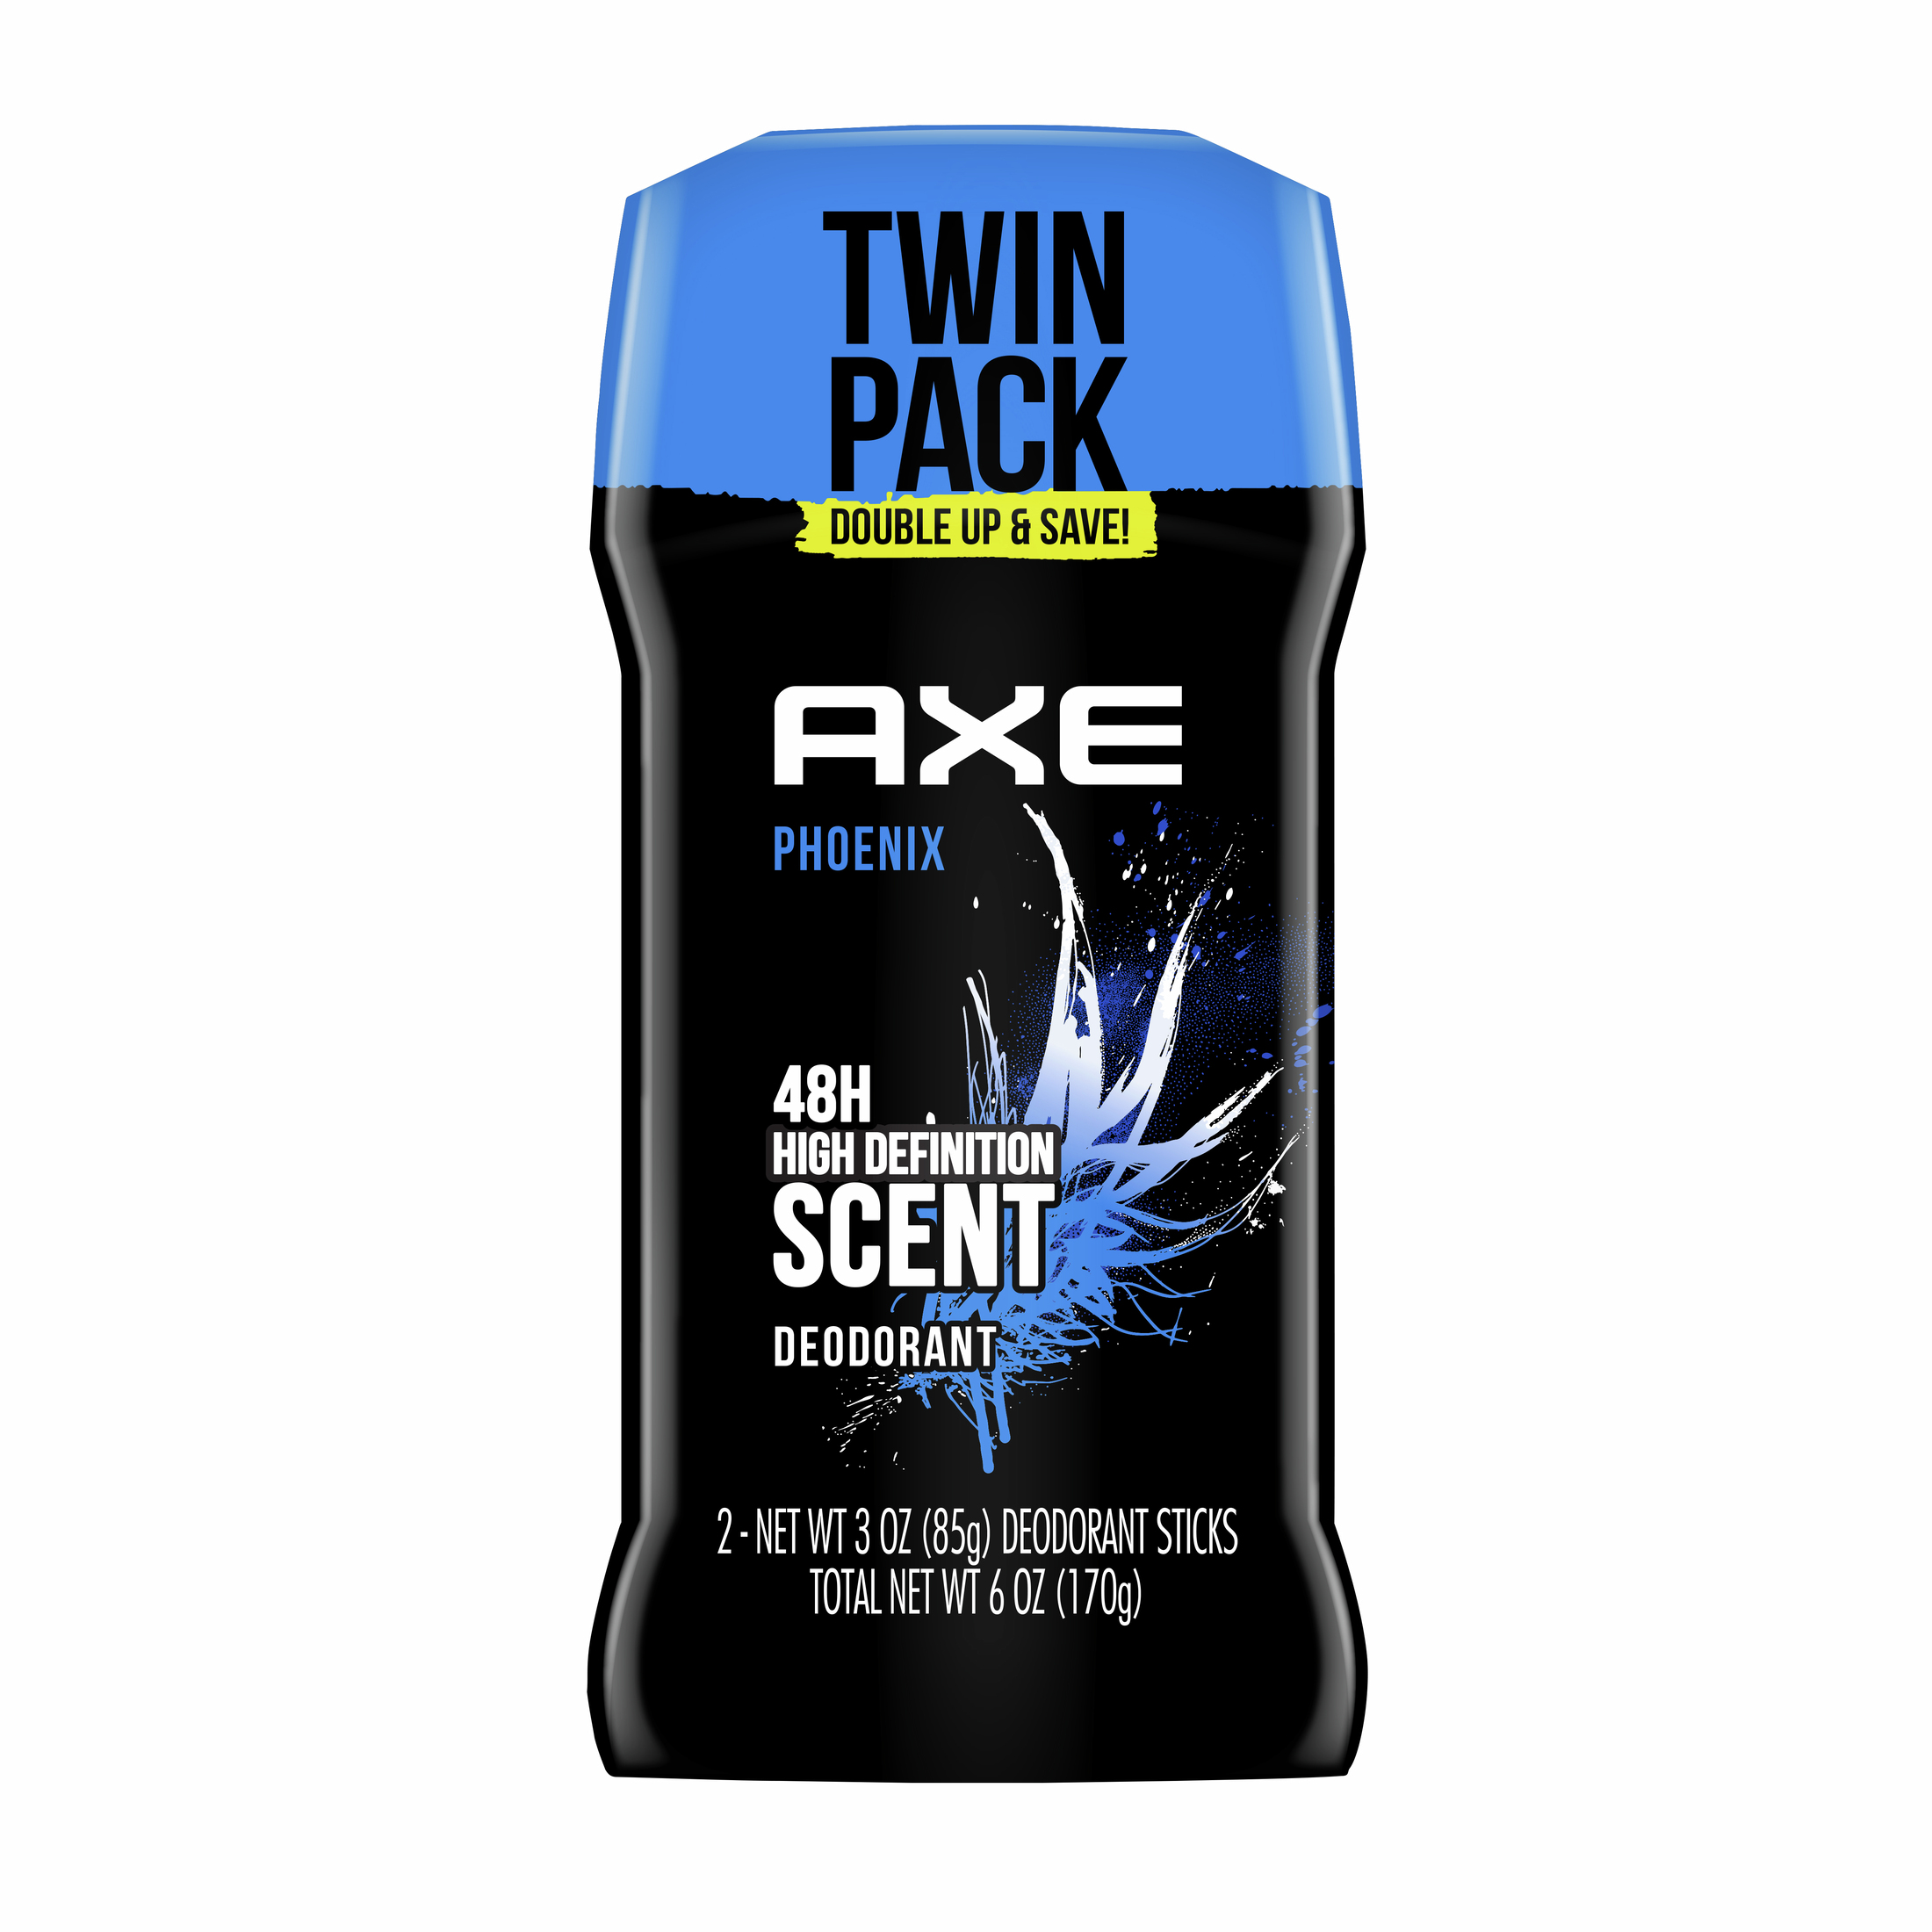 Axe Phoenix Long Lasting Deodorant Stick Twin Pack, Crushed Mint and Rosemary, 3 oz - image 1 of 11